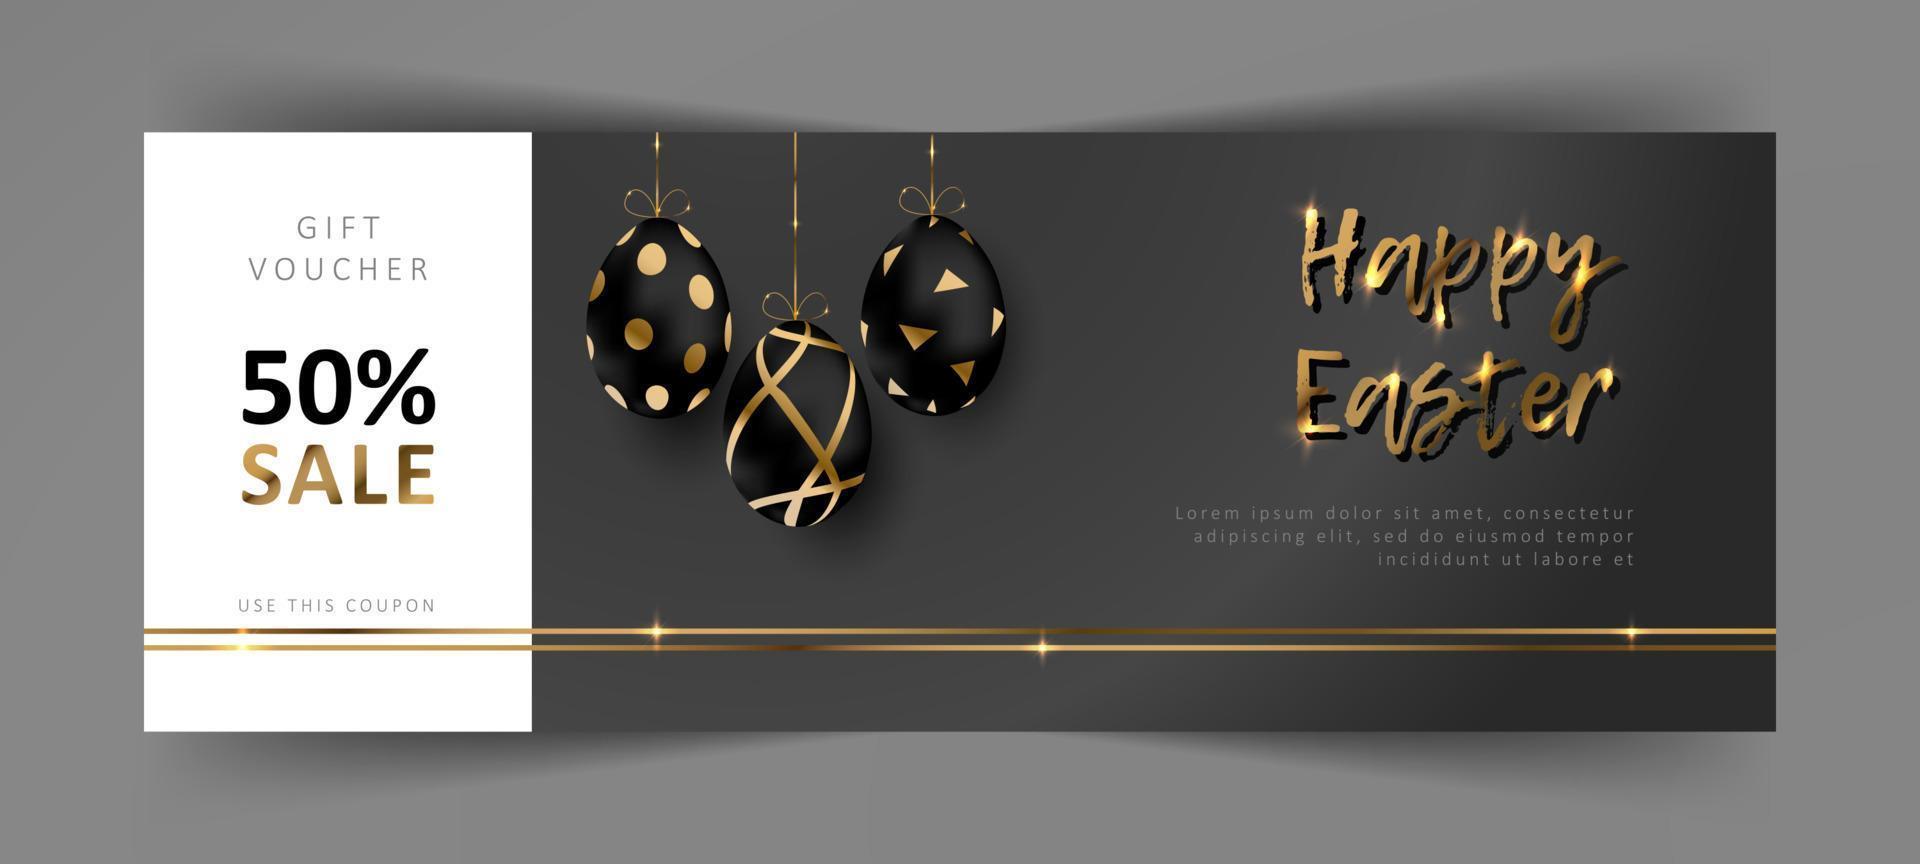 Easter gift voucher. Commercial discount coupon. Black background with gold lettering vector